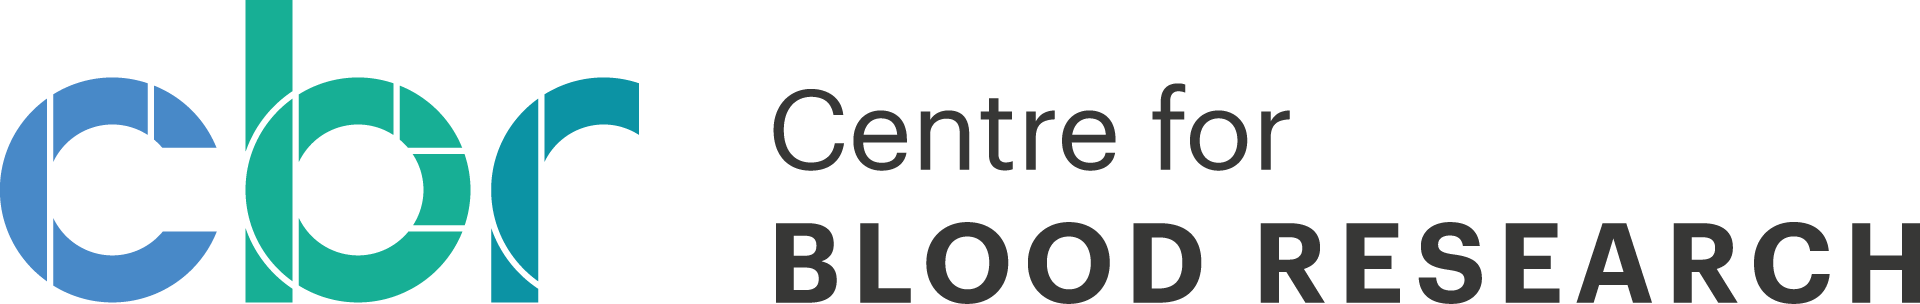 Centre for Blood Research